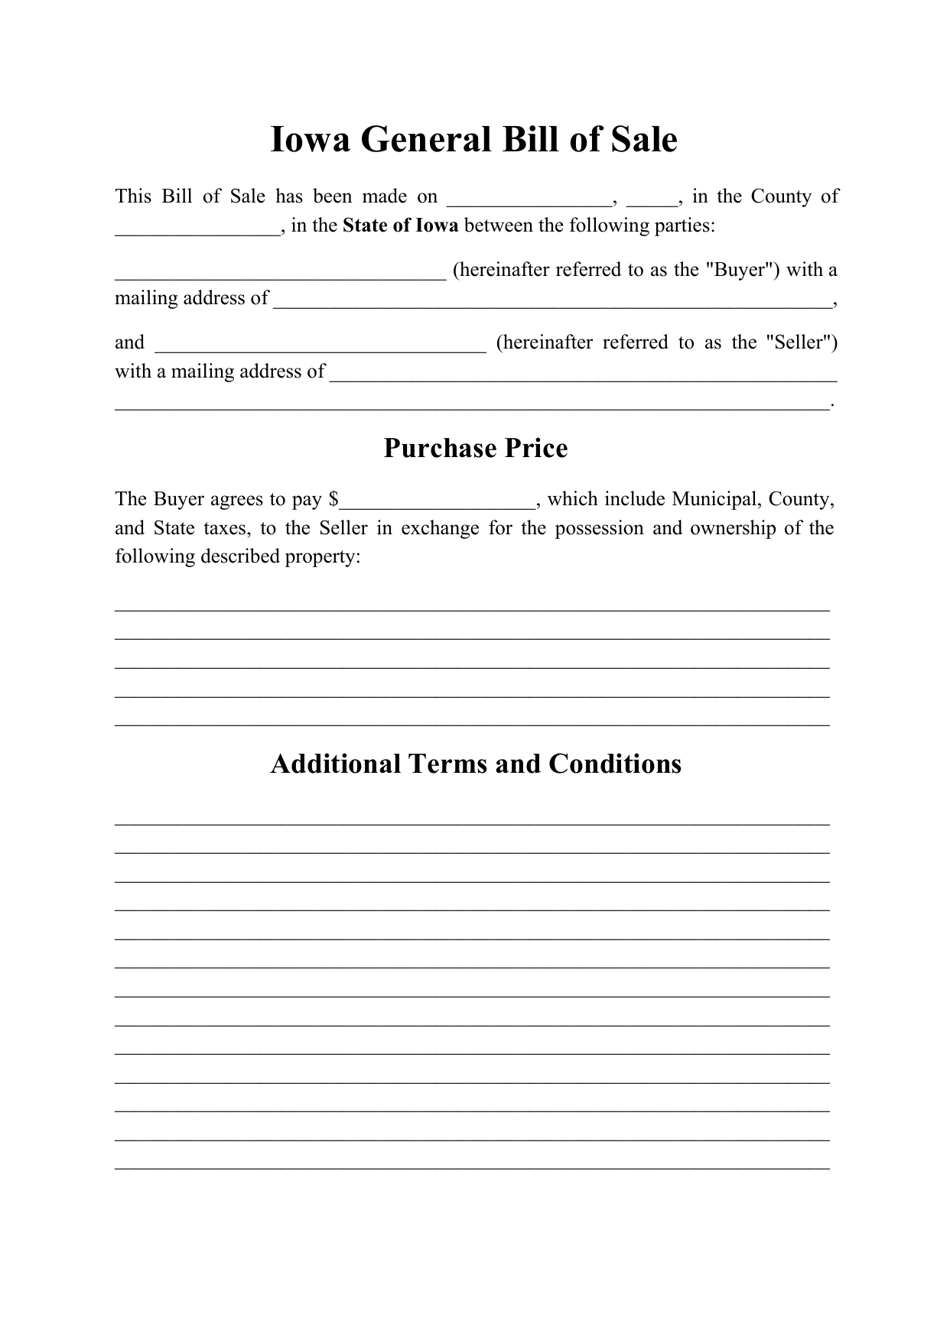 Iowa Generic Bill of Sale Form Download Printable PDF Templateroller